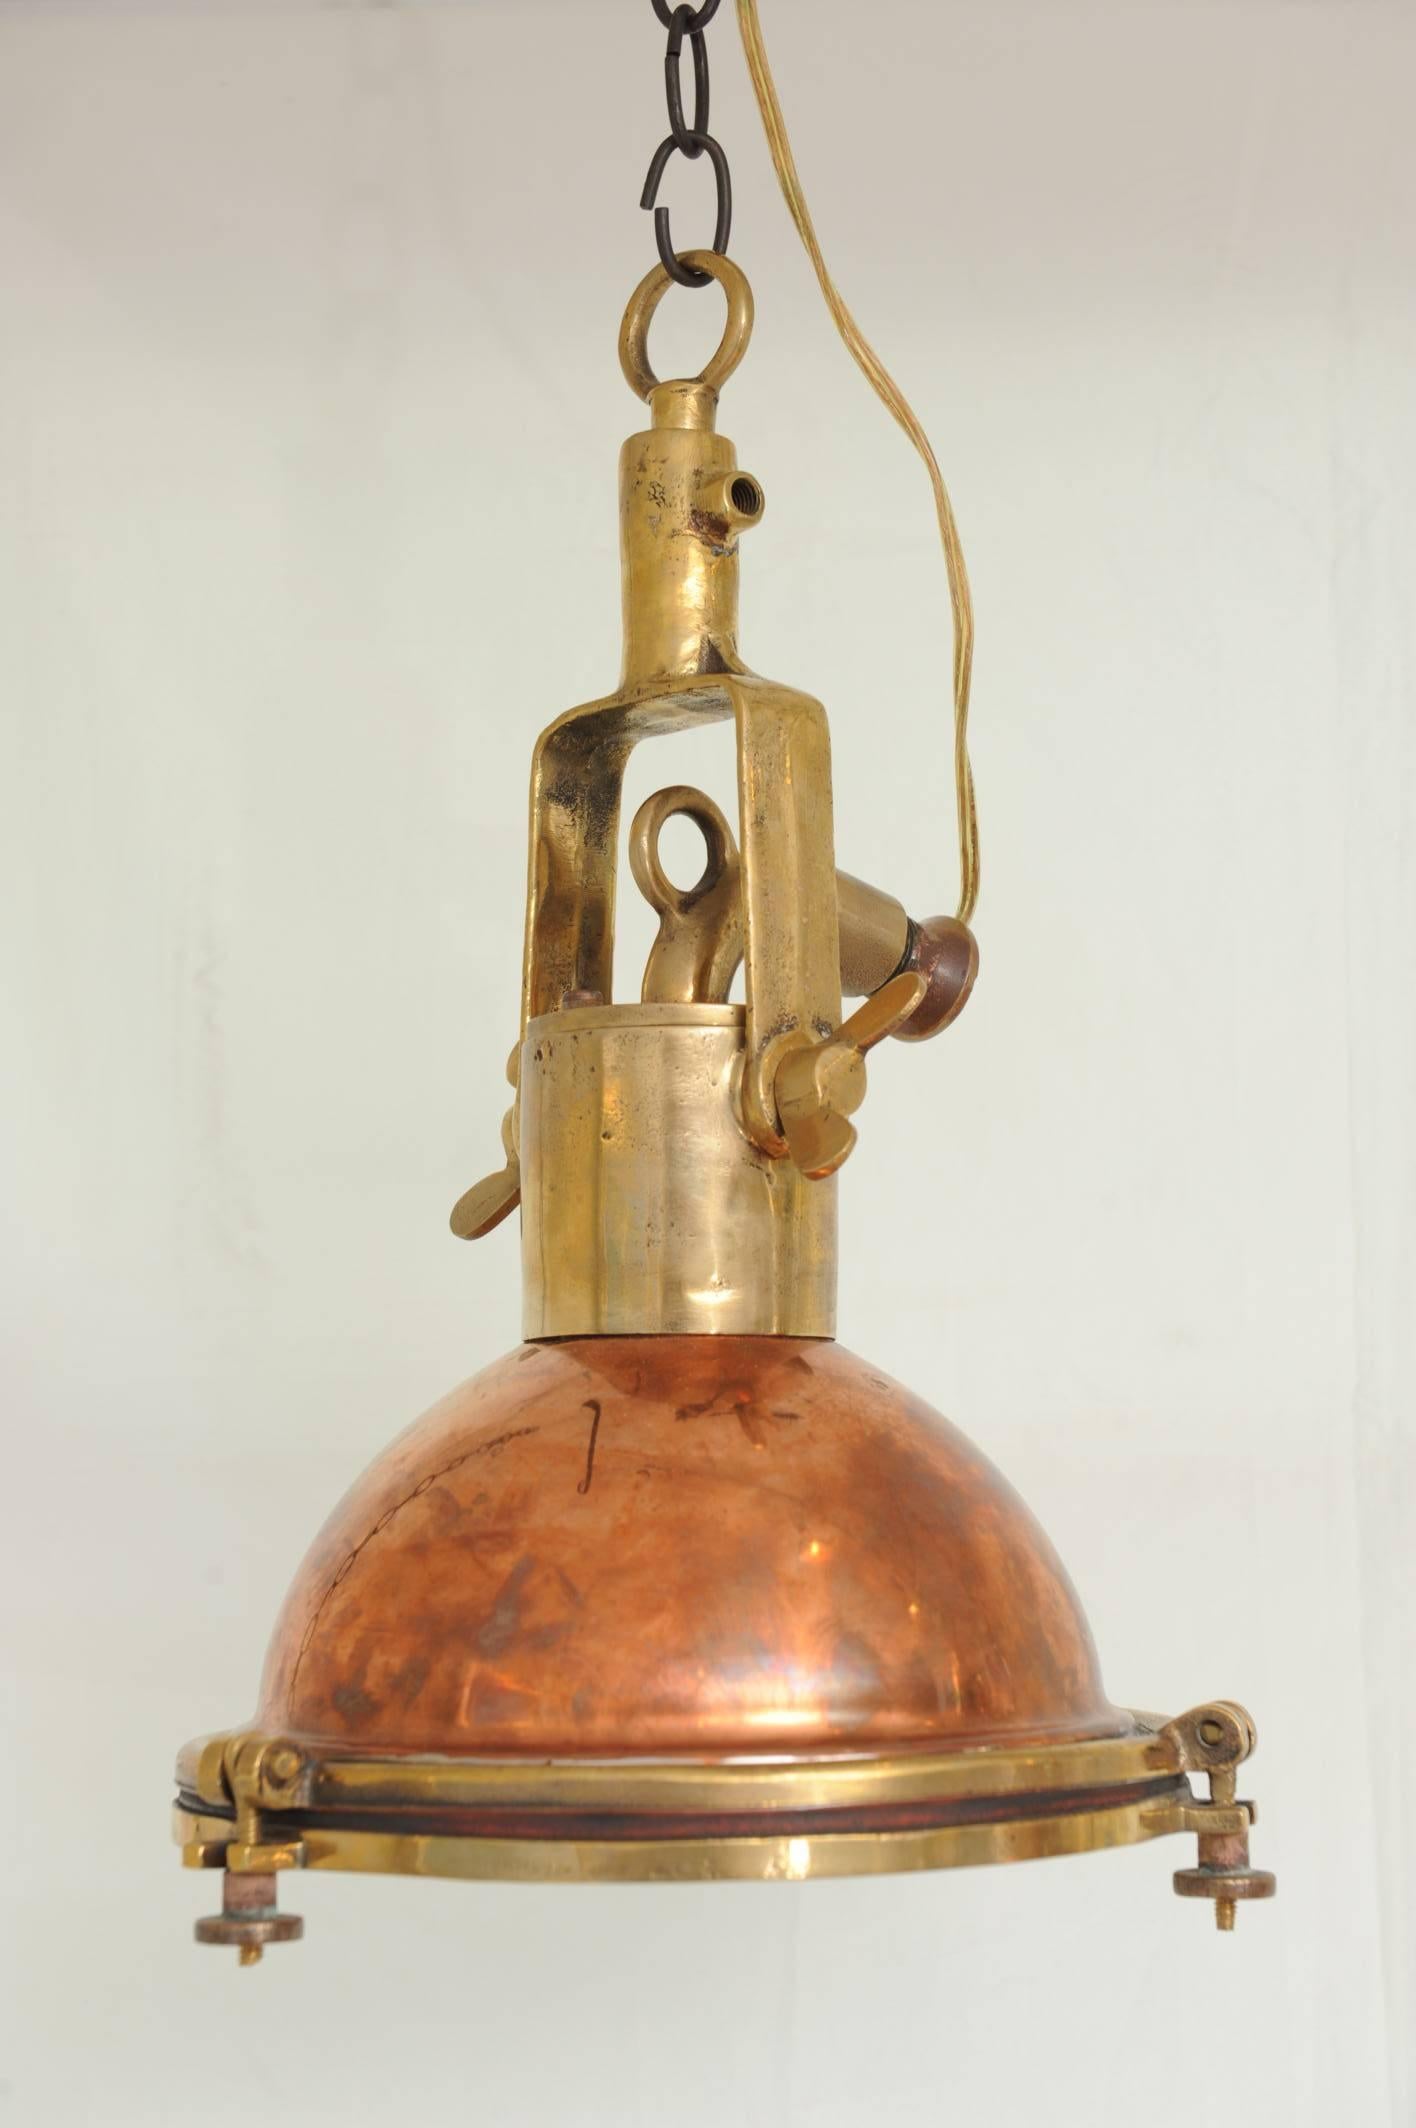 Pair of original Mid-Century ship deck light, copper and brass. Rewired for American use and takes a regular size light bulb. Silver lined interior to reflect additional light.